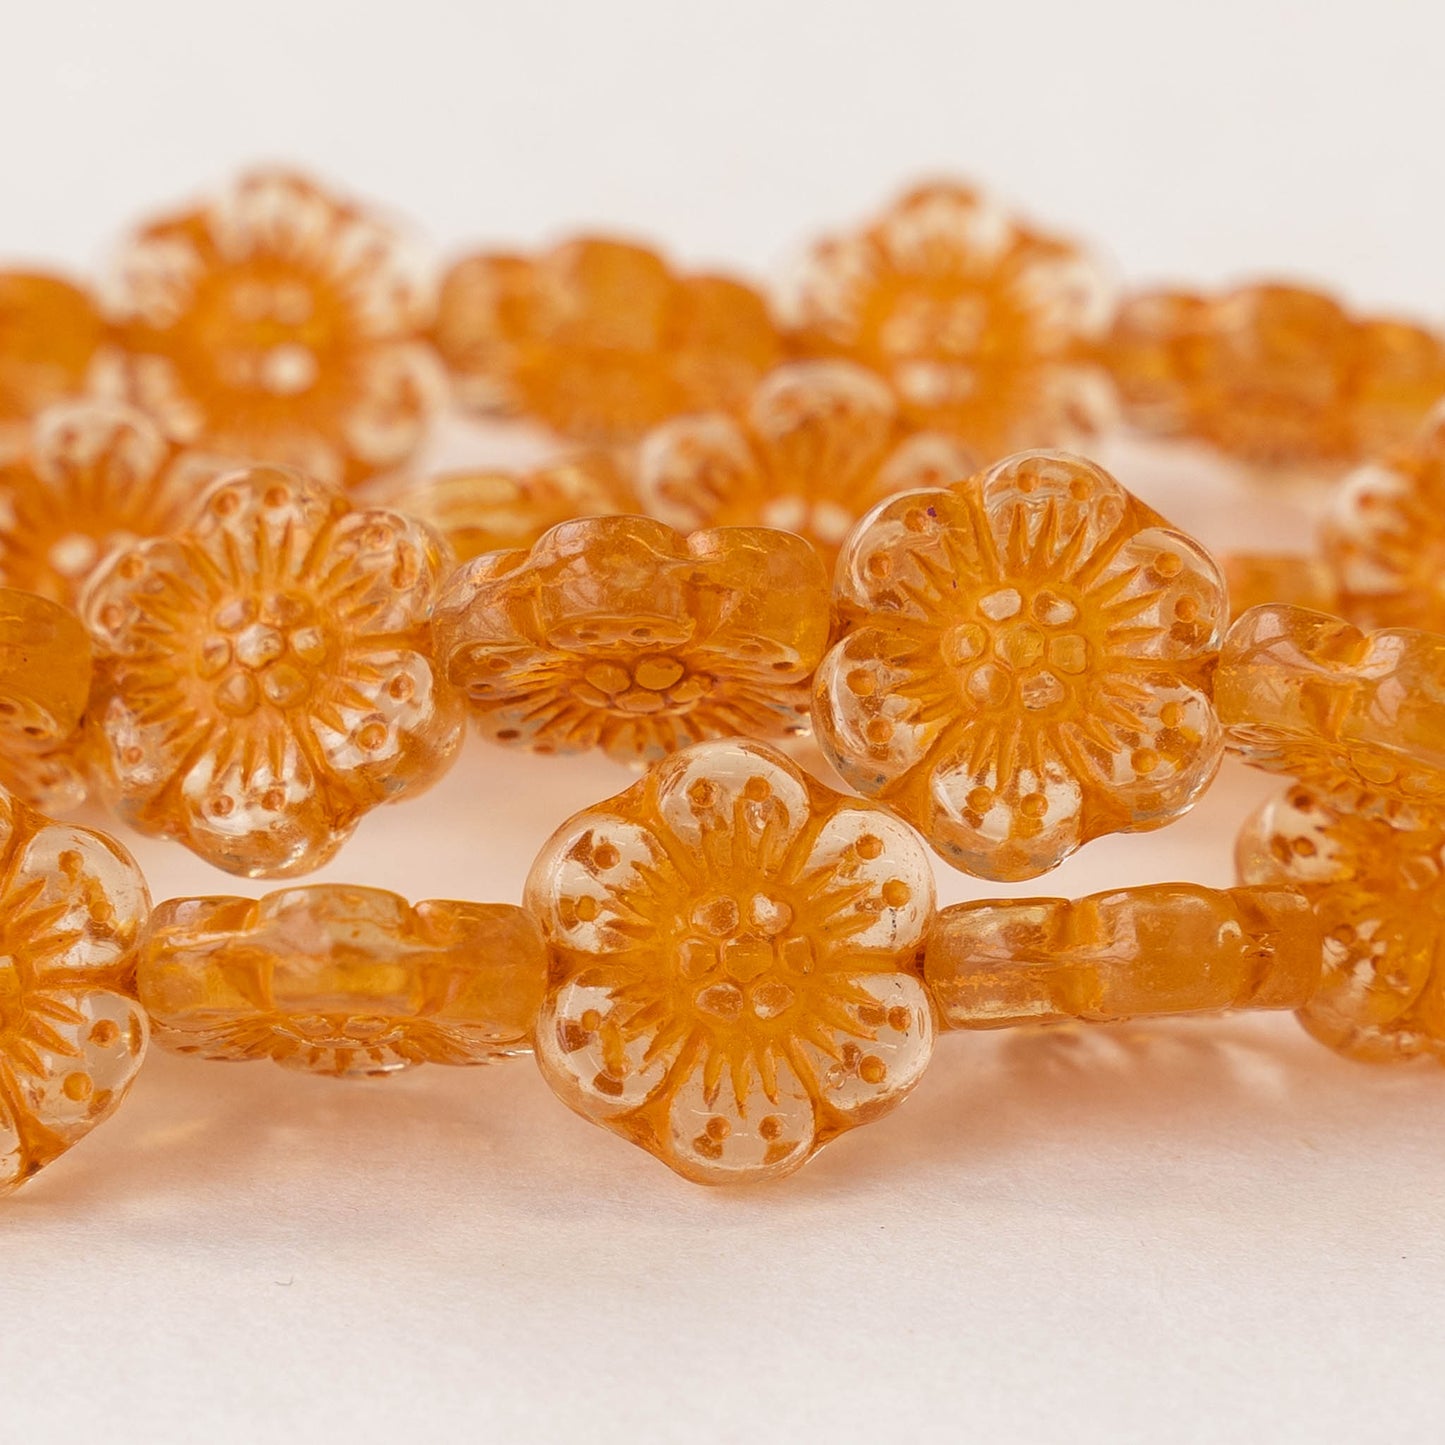 14mm Anemone Flower Beads - Crystal with Orange Wash - 10 Beads